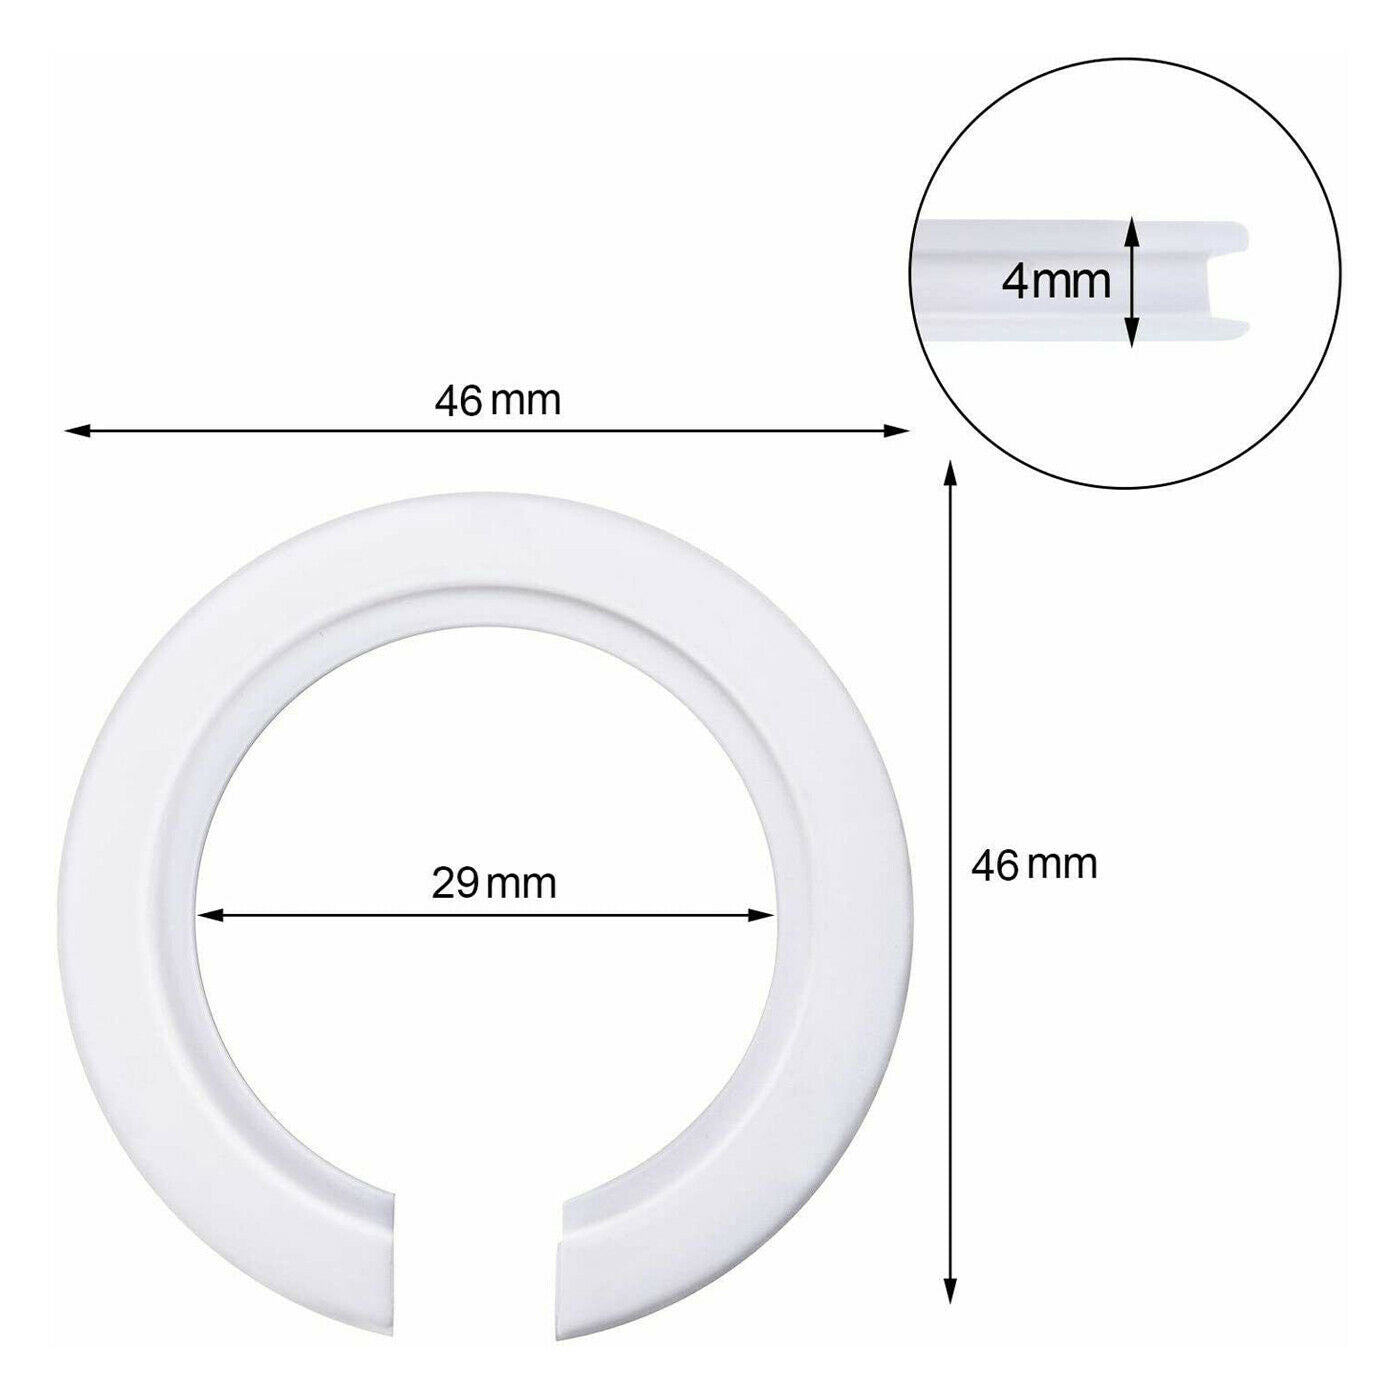 Plastic Lamp Shade Ring Reducer Plate Light Fitting Ring Washer Adapter~1143, Goodies N Stuff